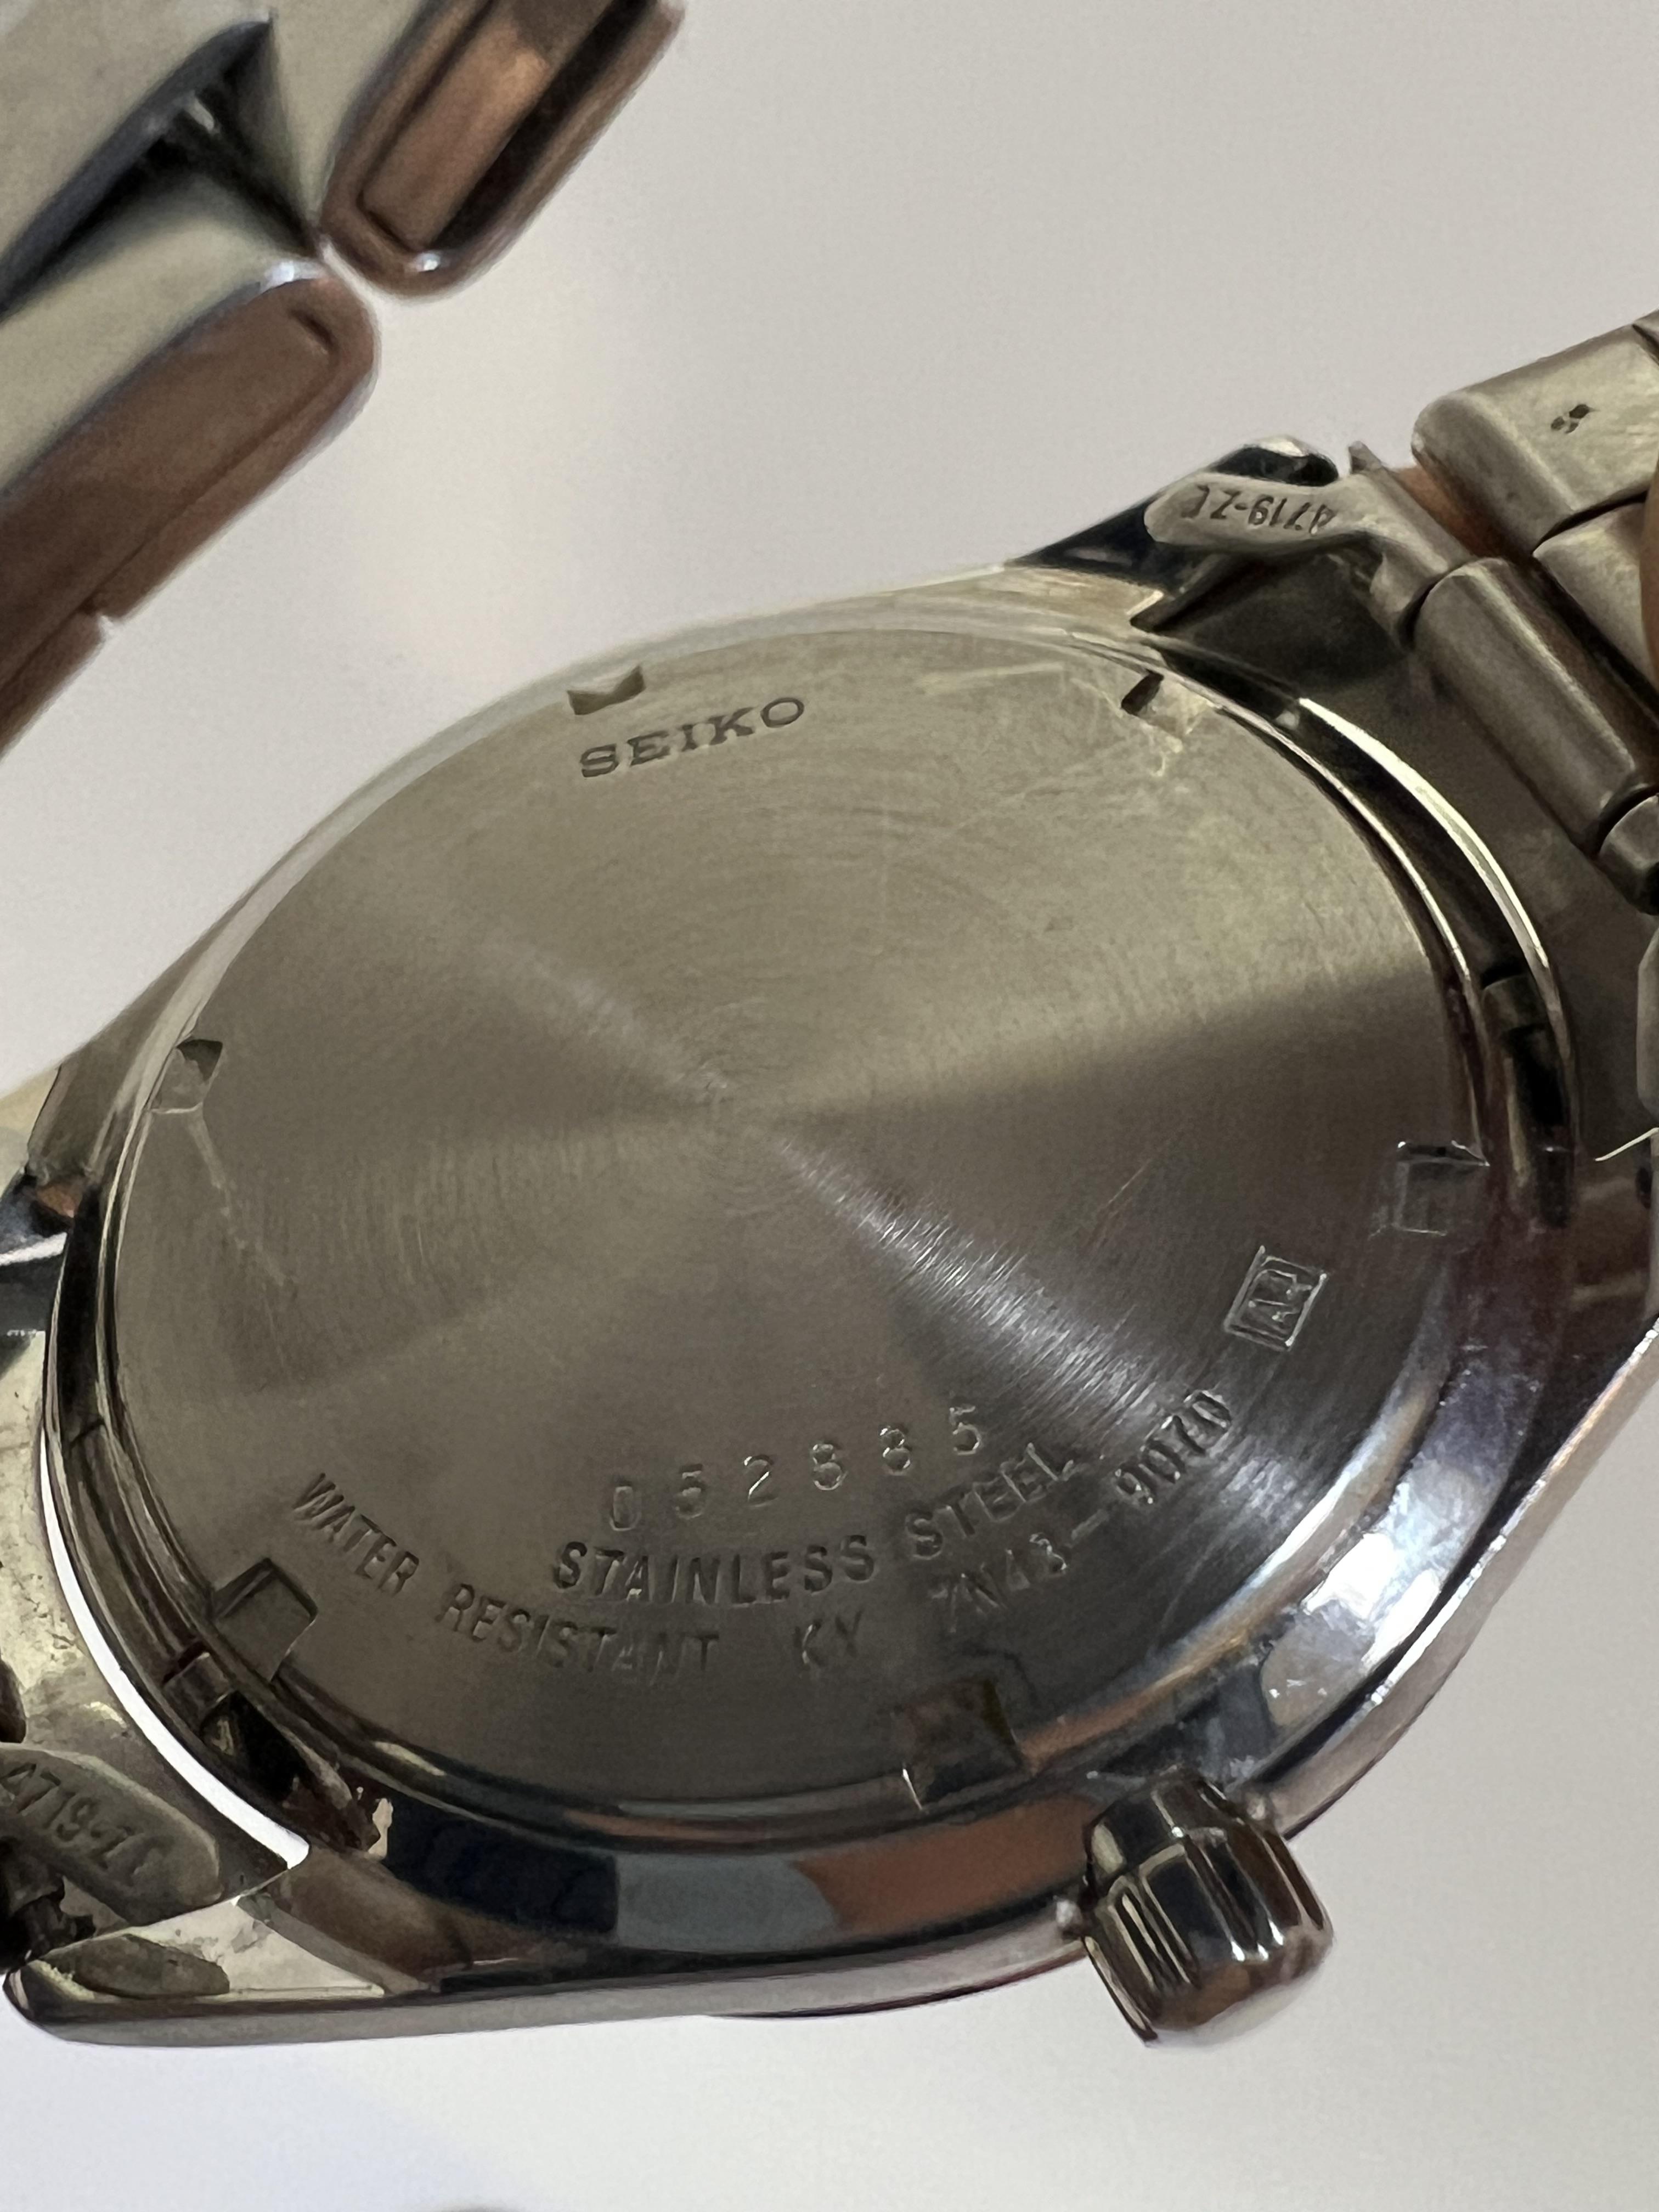 A stainless steel Seiko watch with polished bracelet and day/date complication (quartz movement), - Image 2 of 2